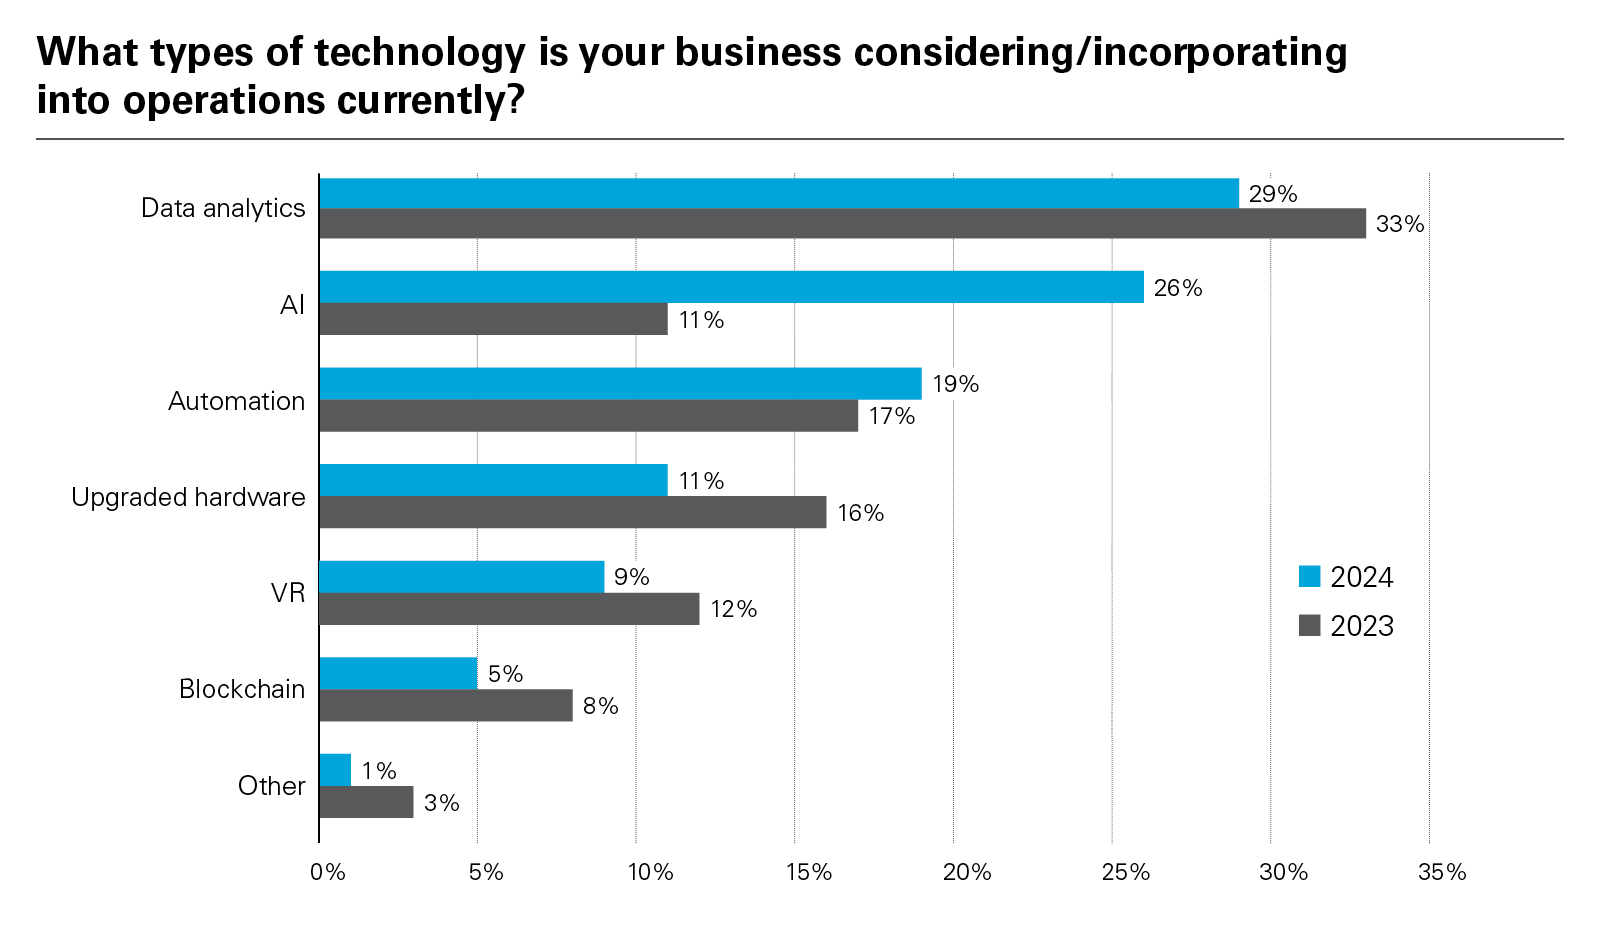 What types of technology is your business considering/incorporating into operations currently?